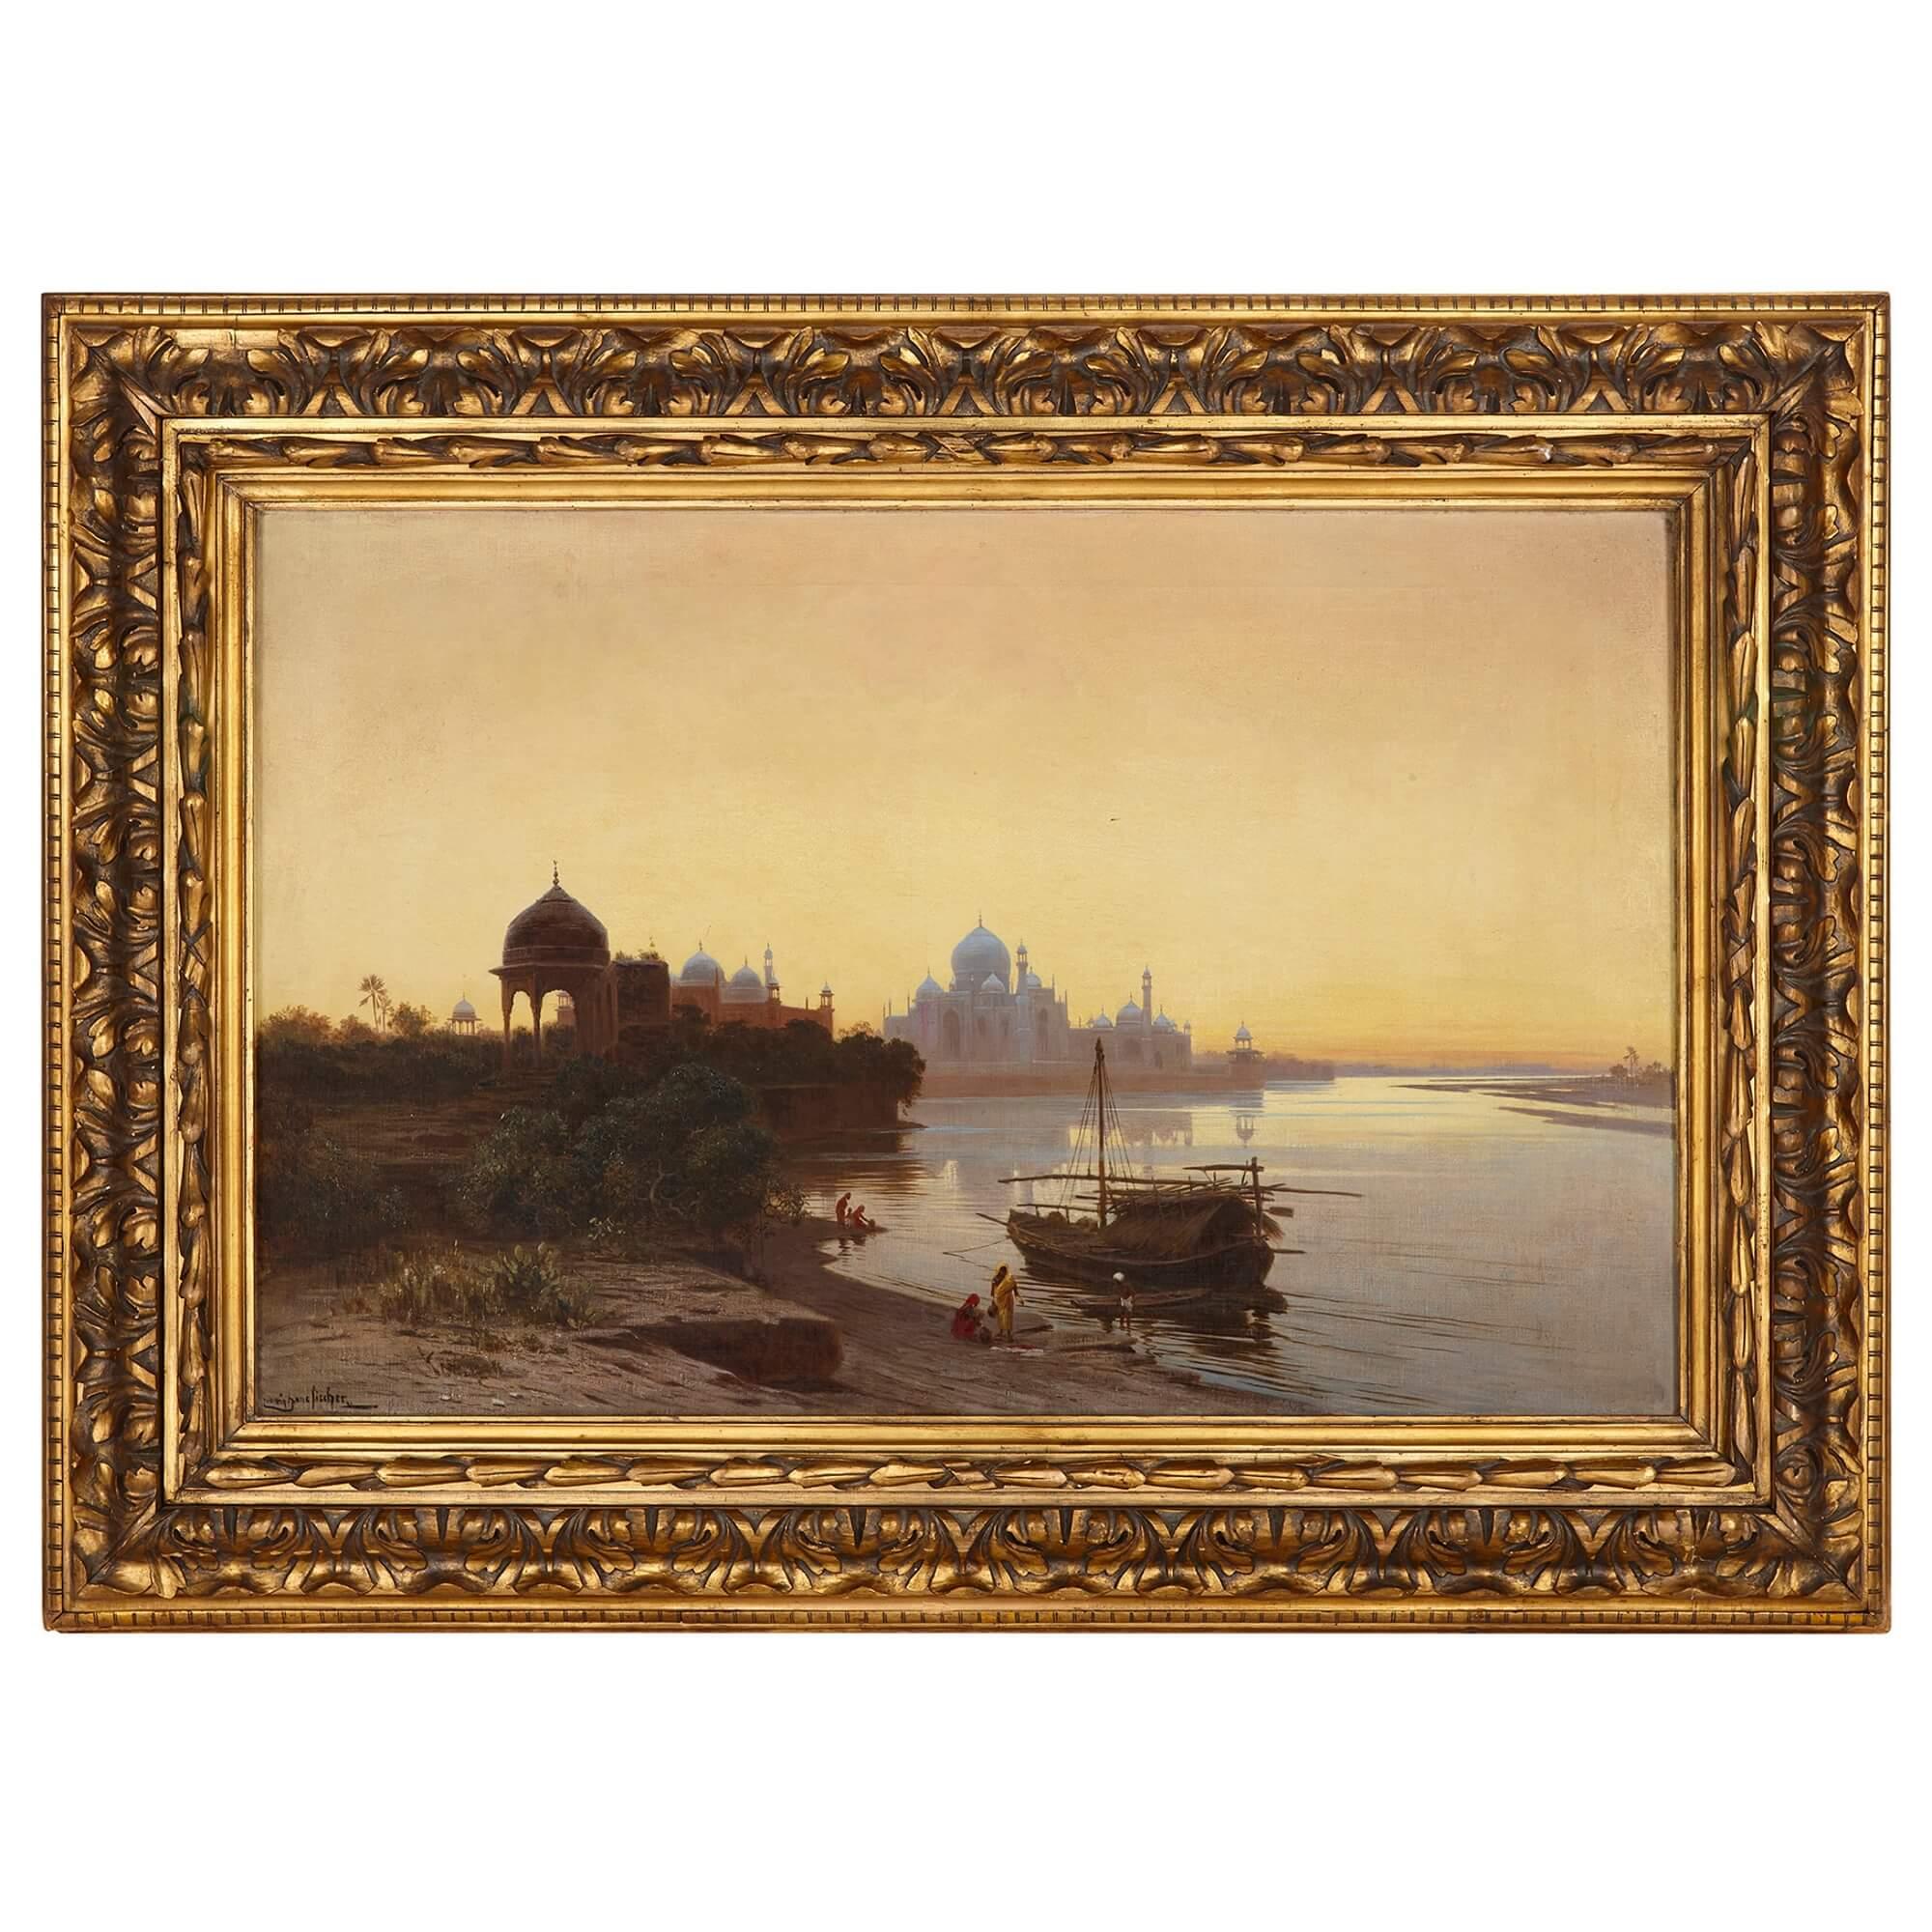 Ludwig Hans Fischer Landscape Painting - Orientalist Antique Painting of The Taj Mahal, by Fischer 